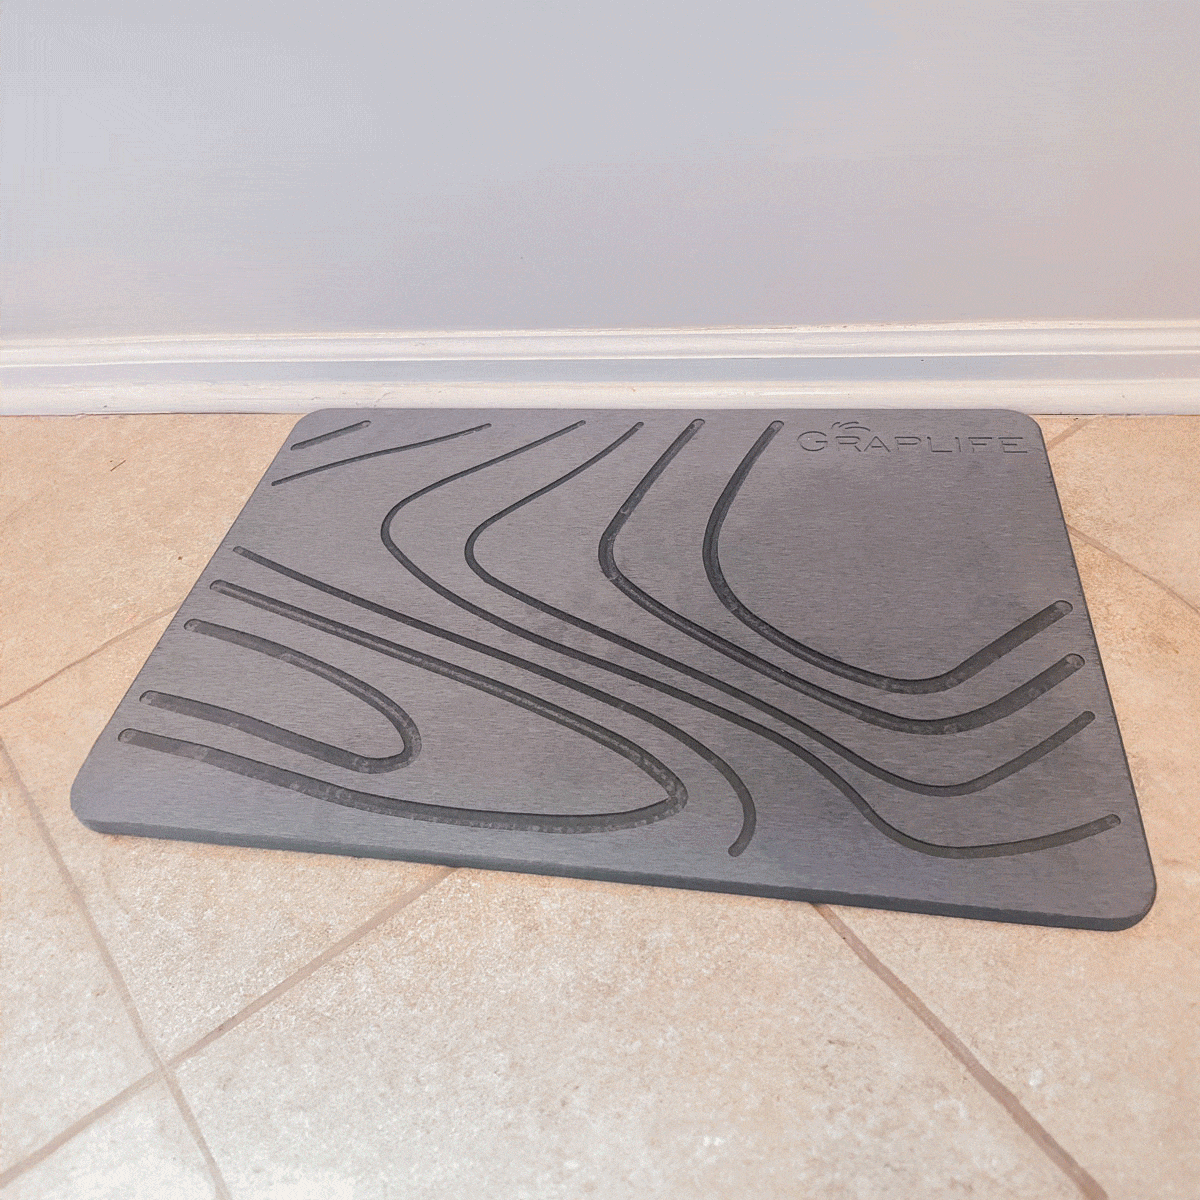 Best Stone Bath Mats Are Antimicrobial And Quick Drying